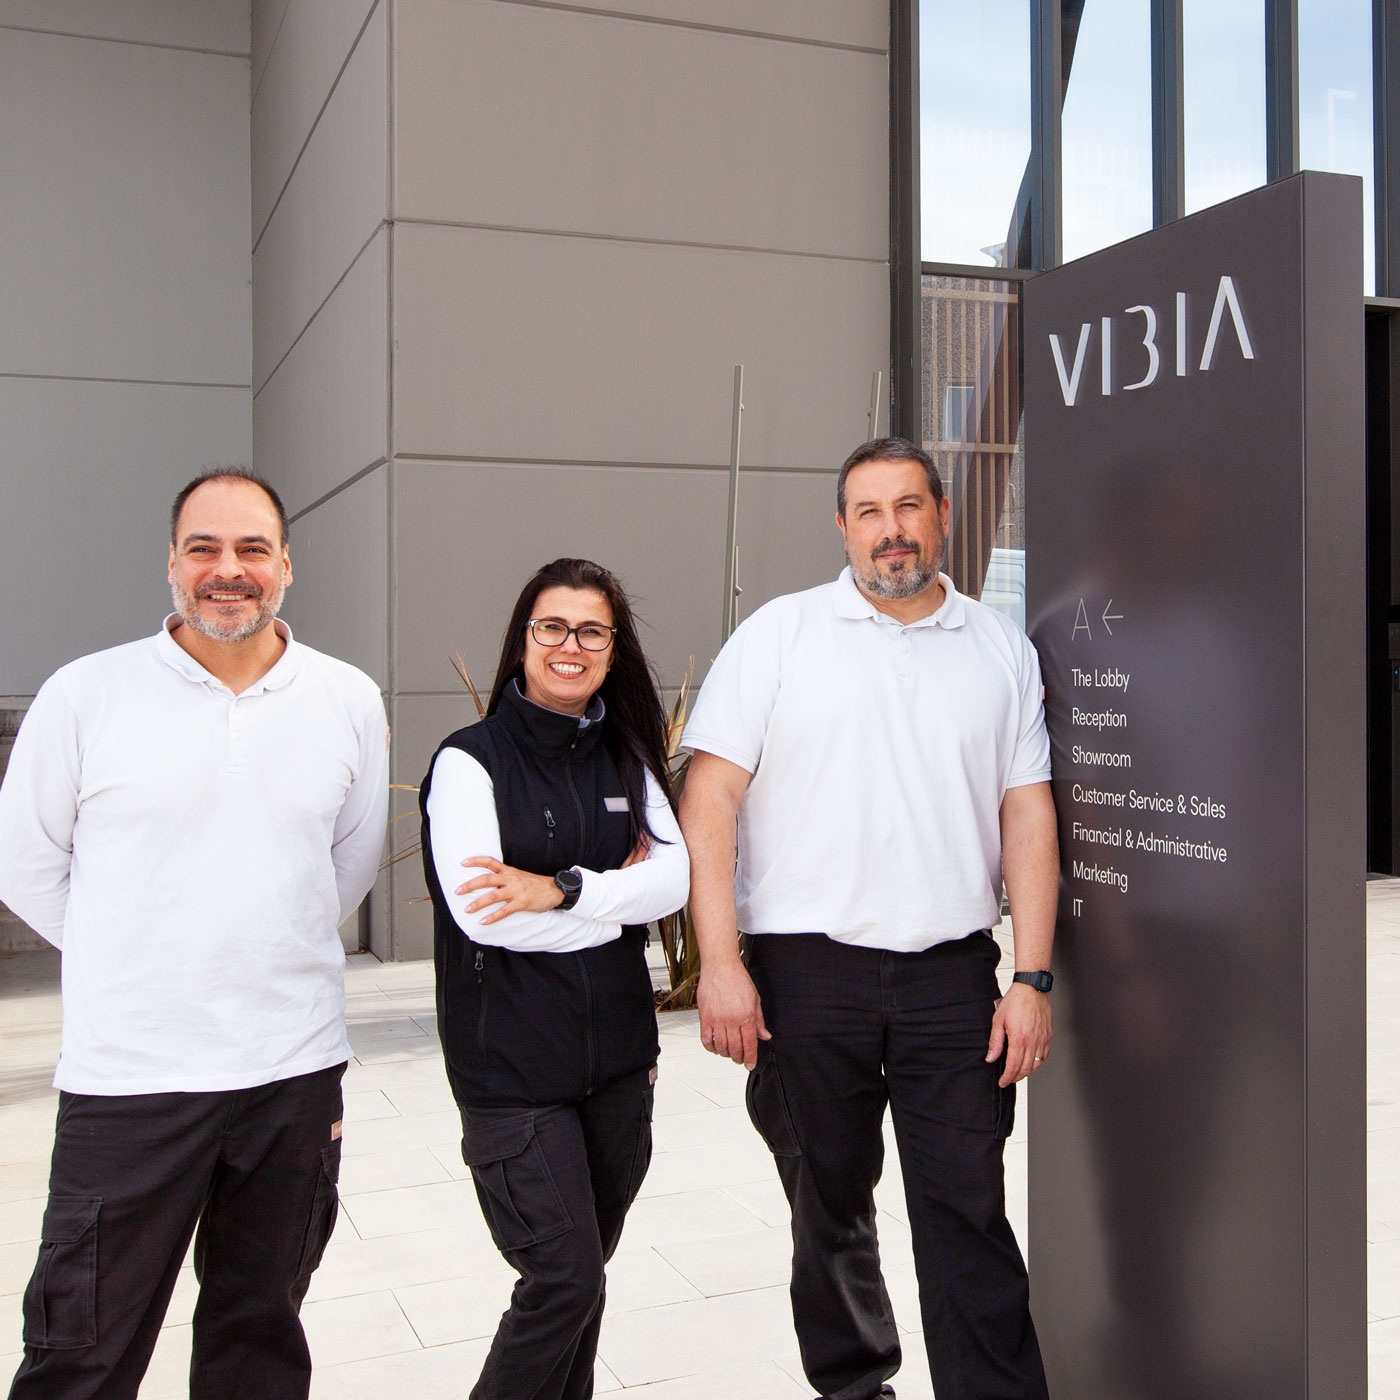 Vibia The Edit - An Inside Look at the Vibia’s Assembly Team